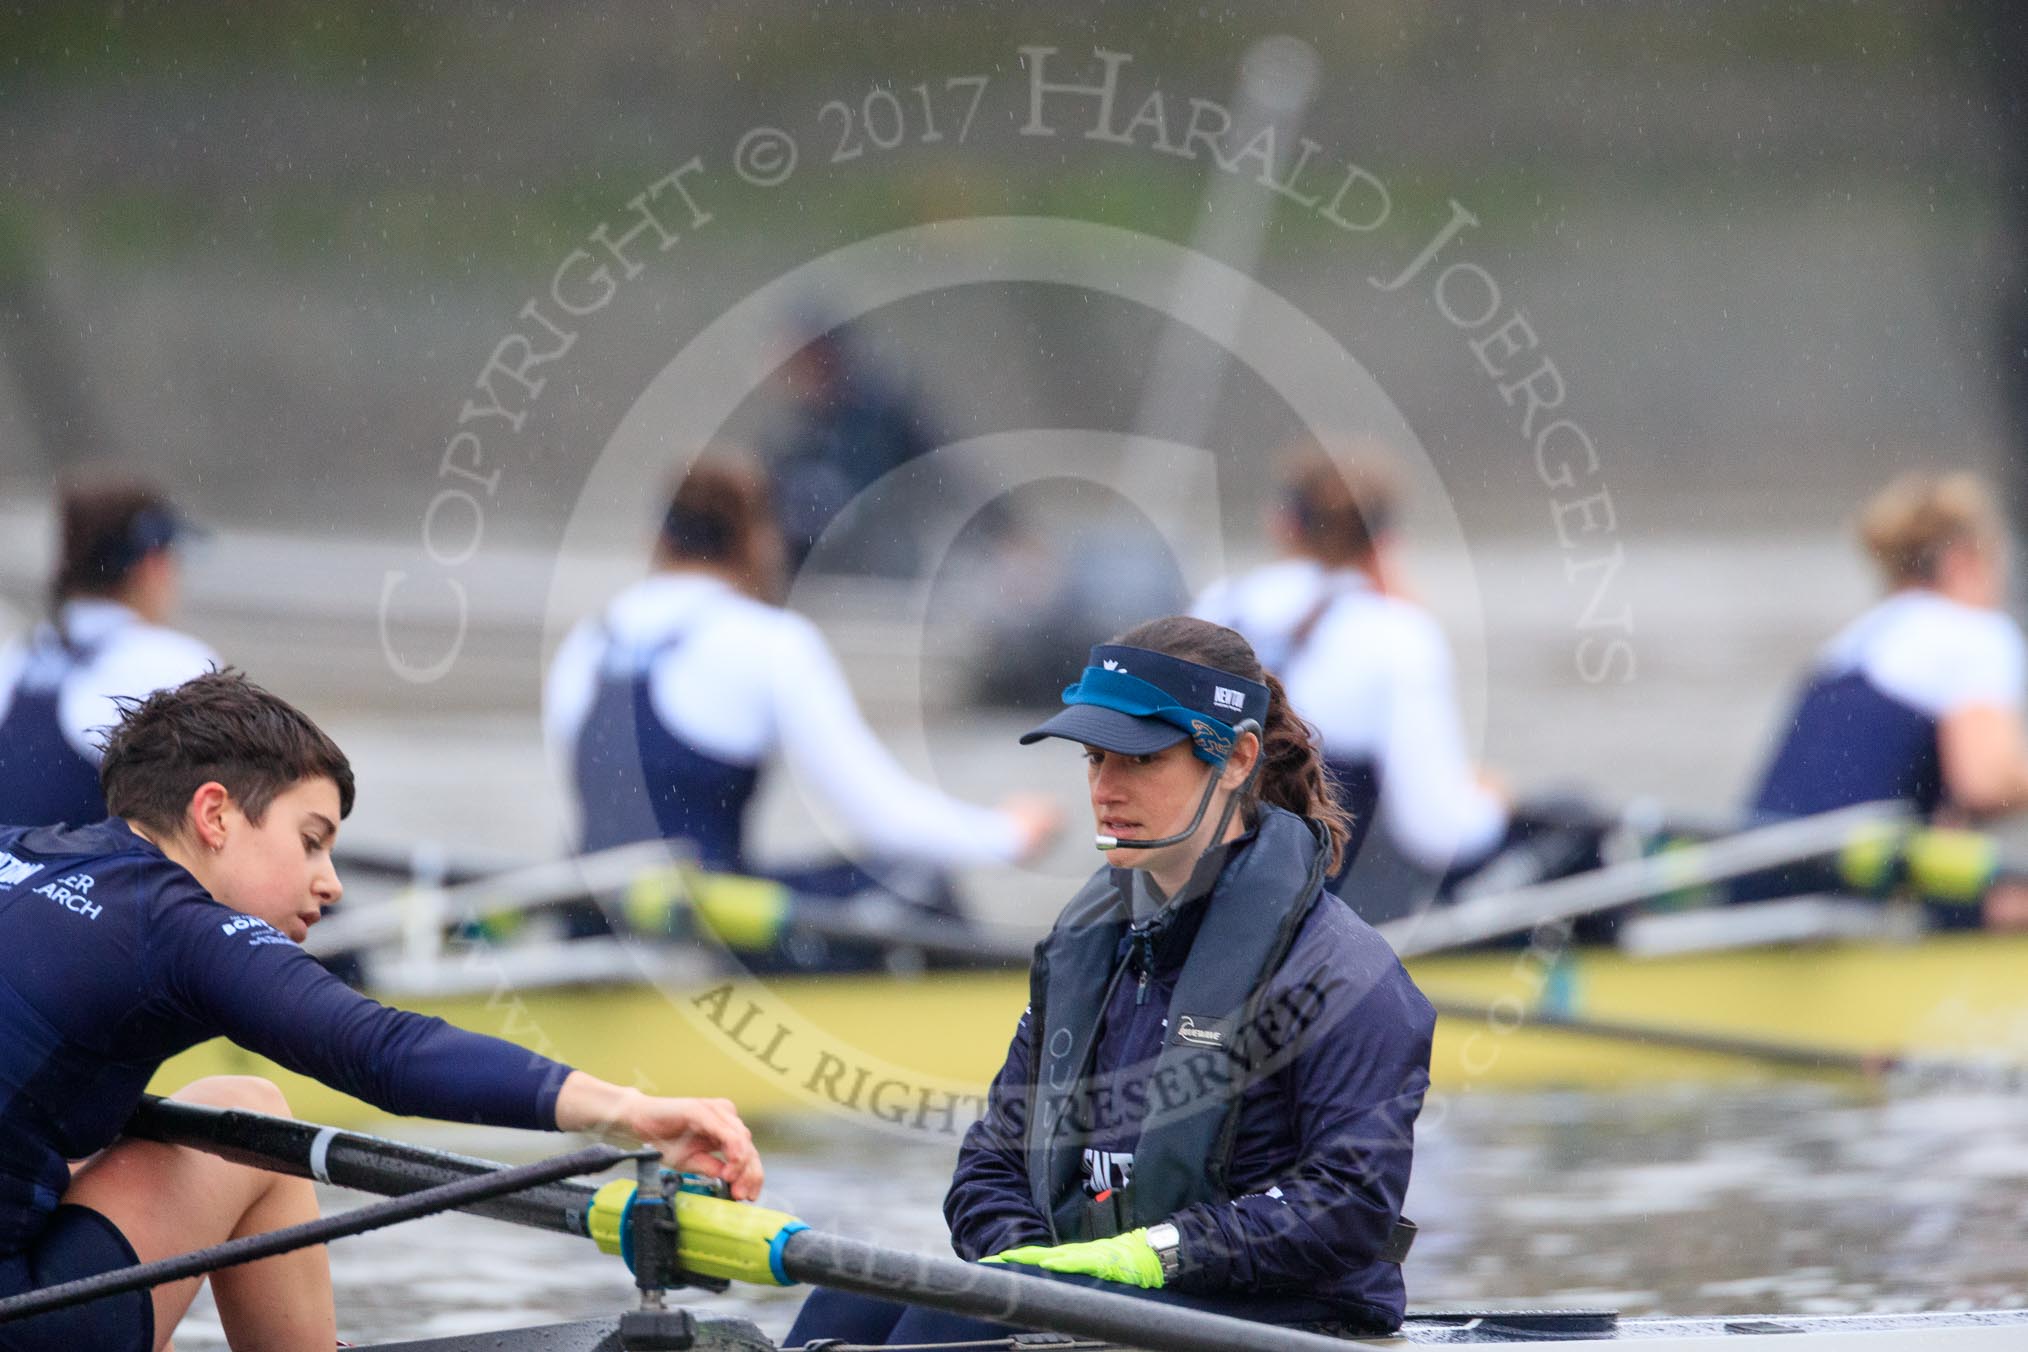 The Boat Race season 2018 - Women's Boat Race Trial Eights (OUWBC, Oxford): Adjustments before the race - stroke Alice Roberts, cox Jessica Buck on "Great Typhoon", with "Coursing River" (and the rain) in the background.
River Thames between Putney Bridge and Mortlake,
London SW15,

United Kingdom,
on 21 January 2018 at 14:23, image #36